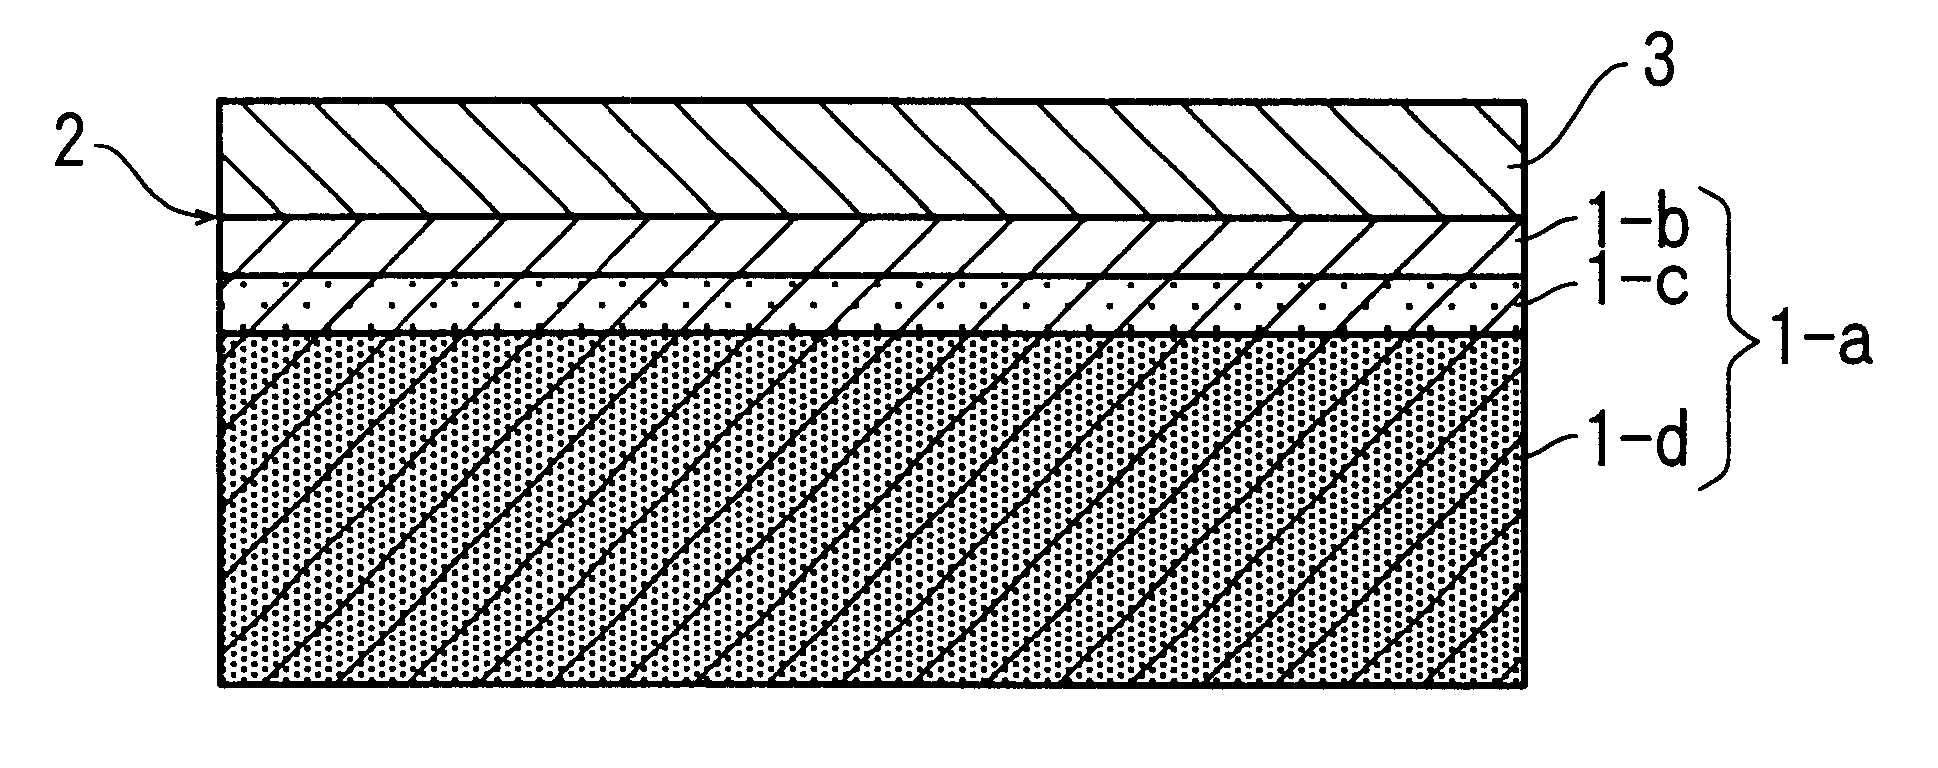 Silicon semiconductor wafer and method for producing the same